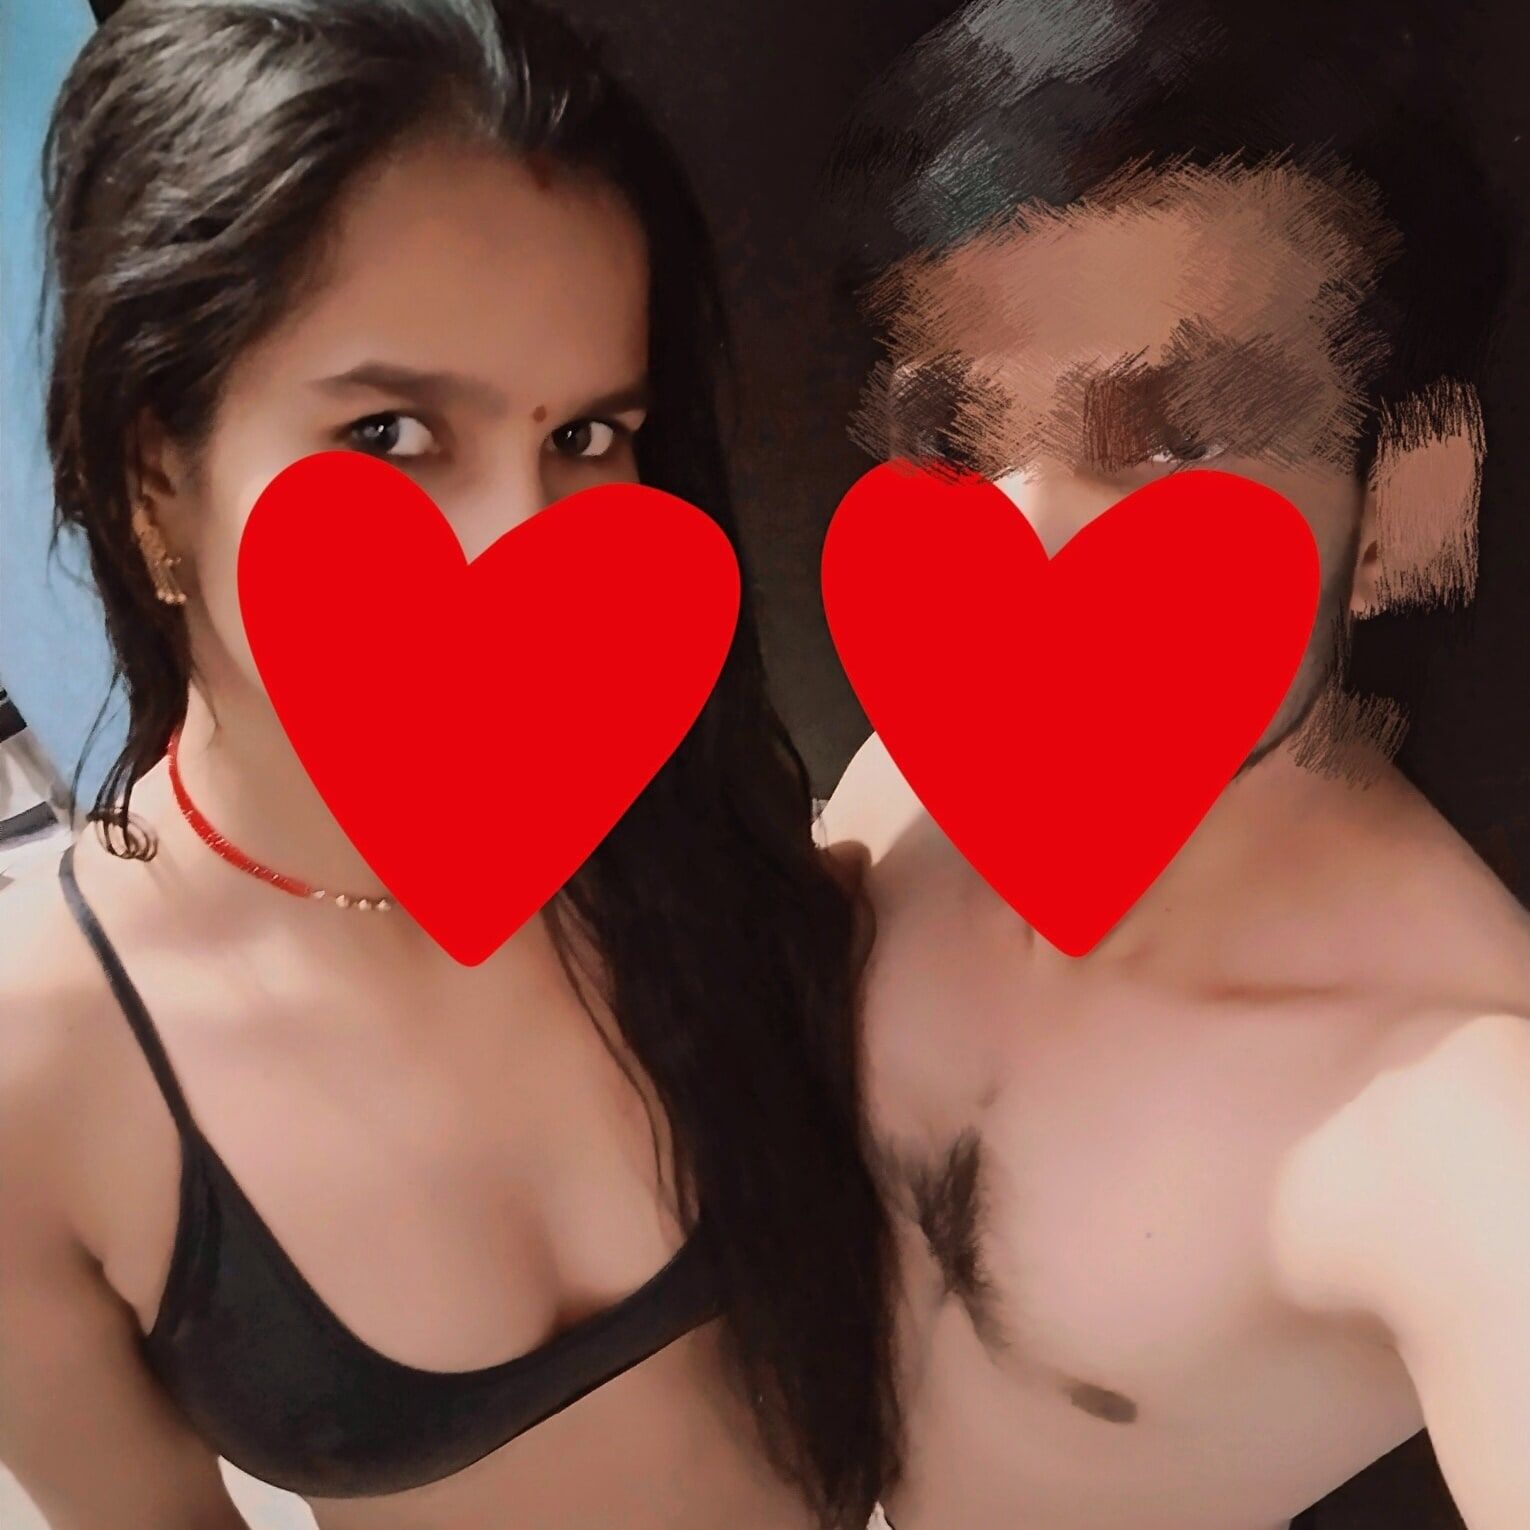 Me and my horny wife jiya .have some fun time photos  #60